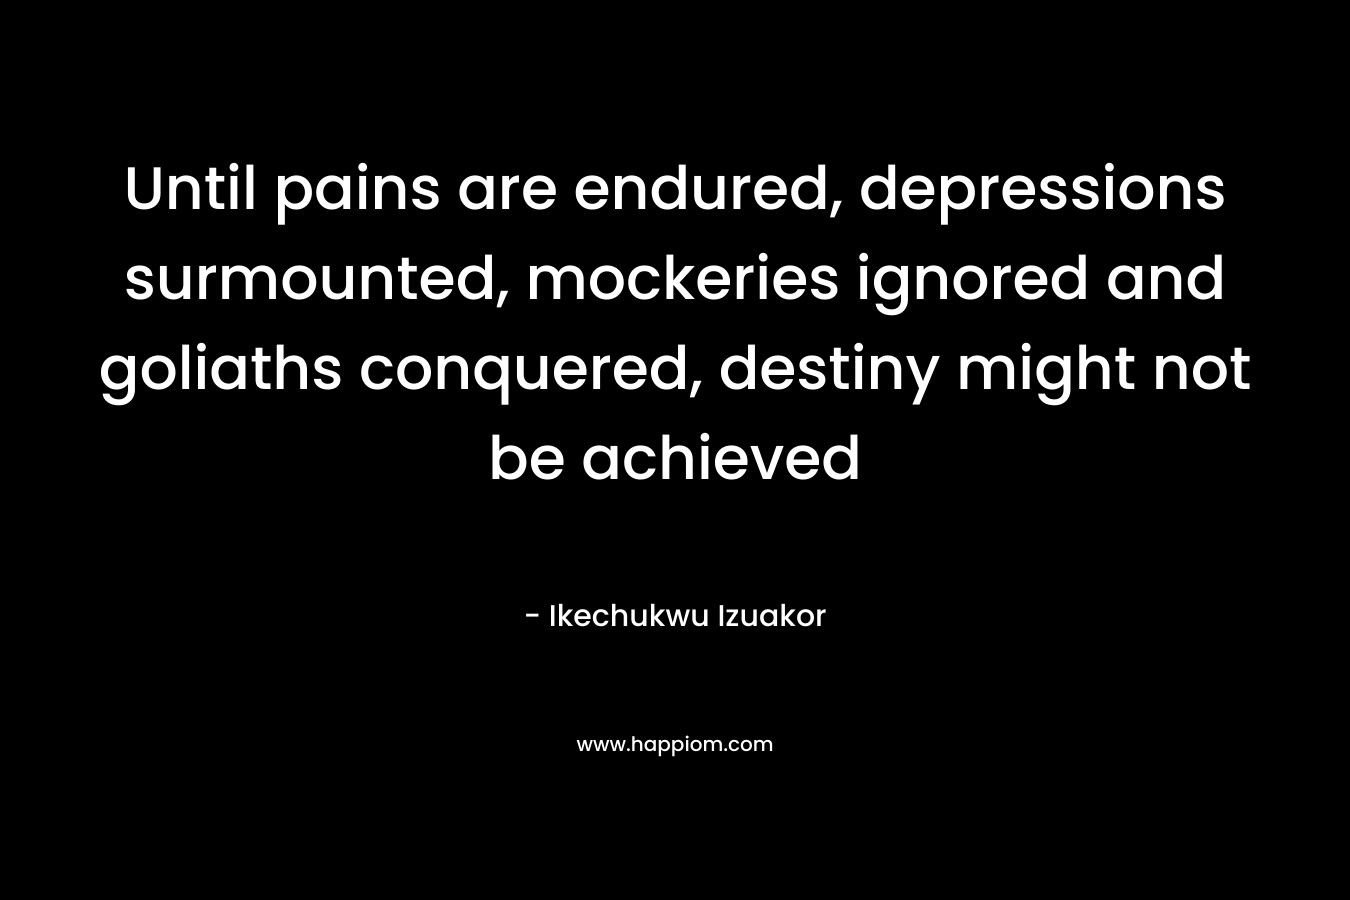 Until pains are endured, depressions surmounted, mockeries ignored and goliaths conquered, destiny might not be achieved